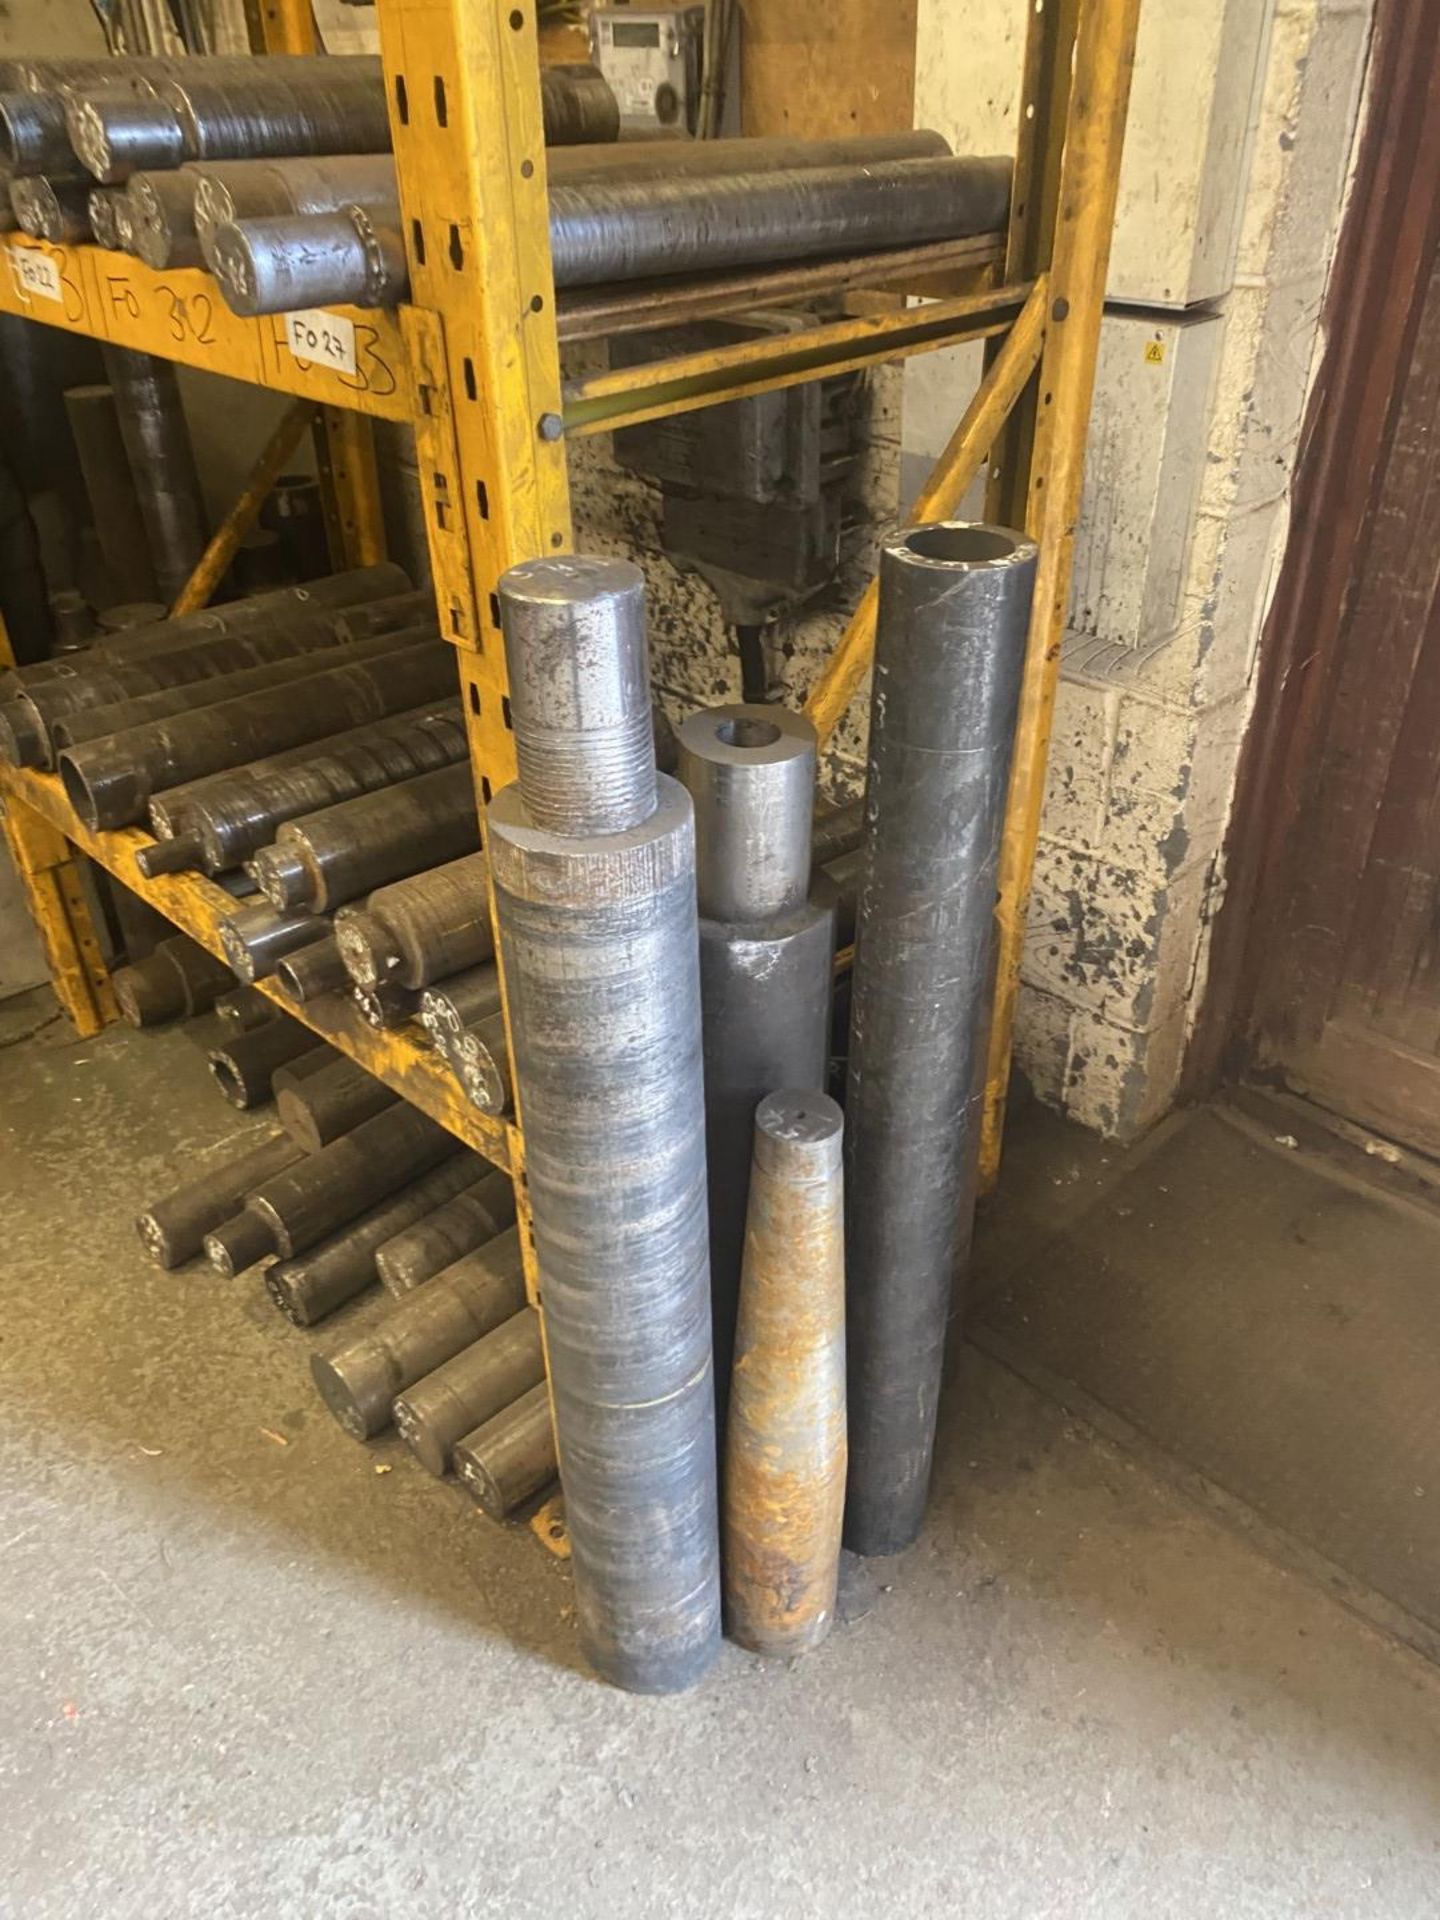 Approx 50 x Rollers For Forming Springs - Includes Storage Rack as Pictured - Image 3 of 3